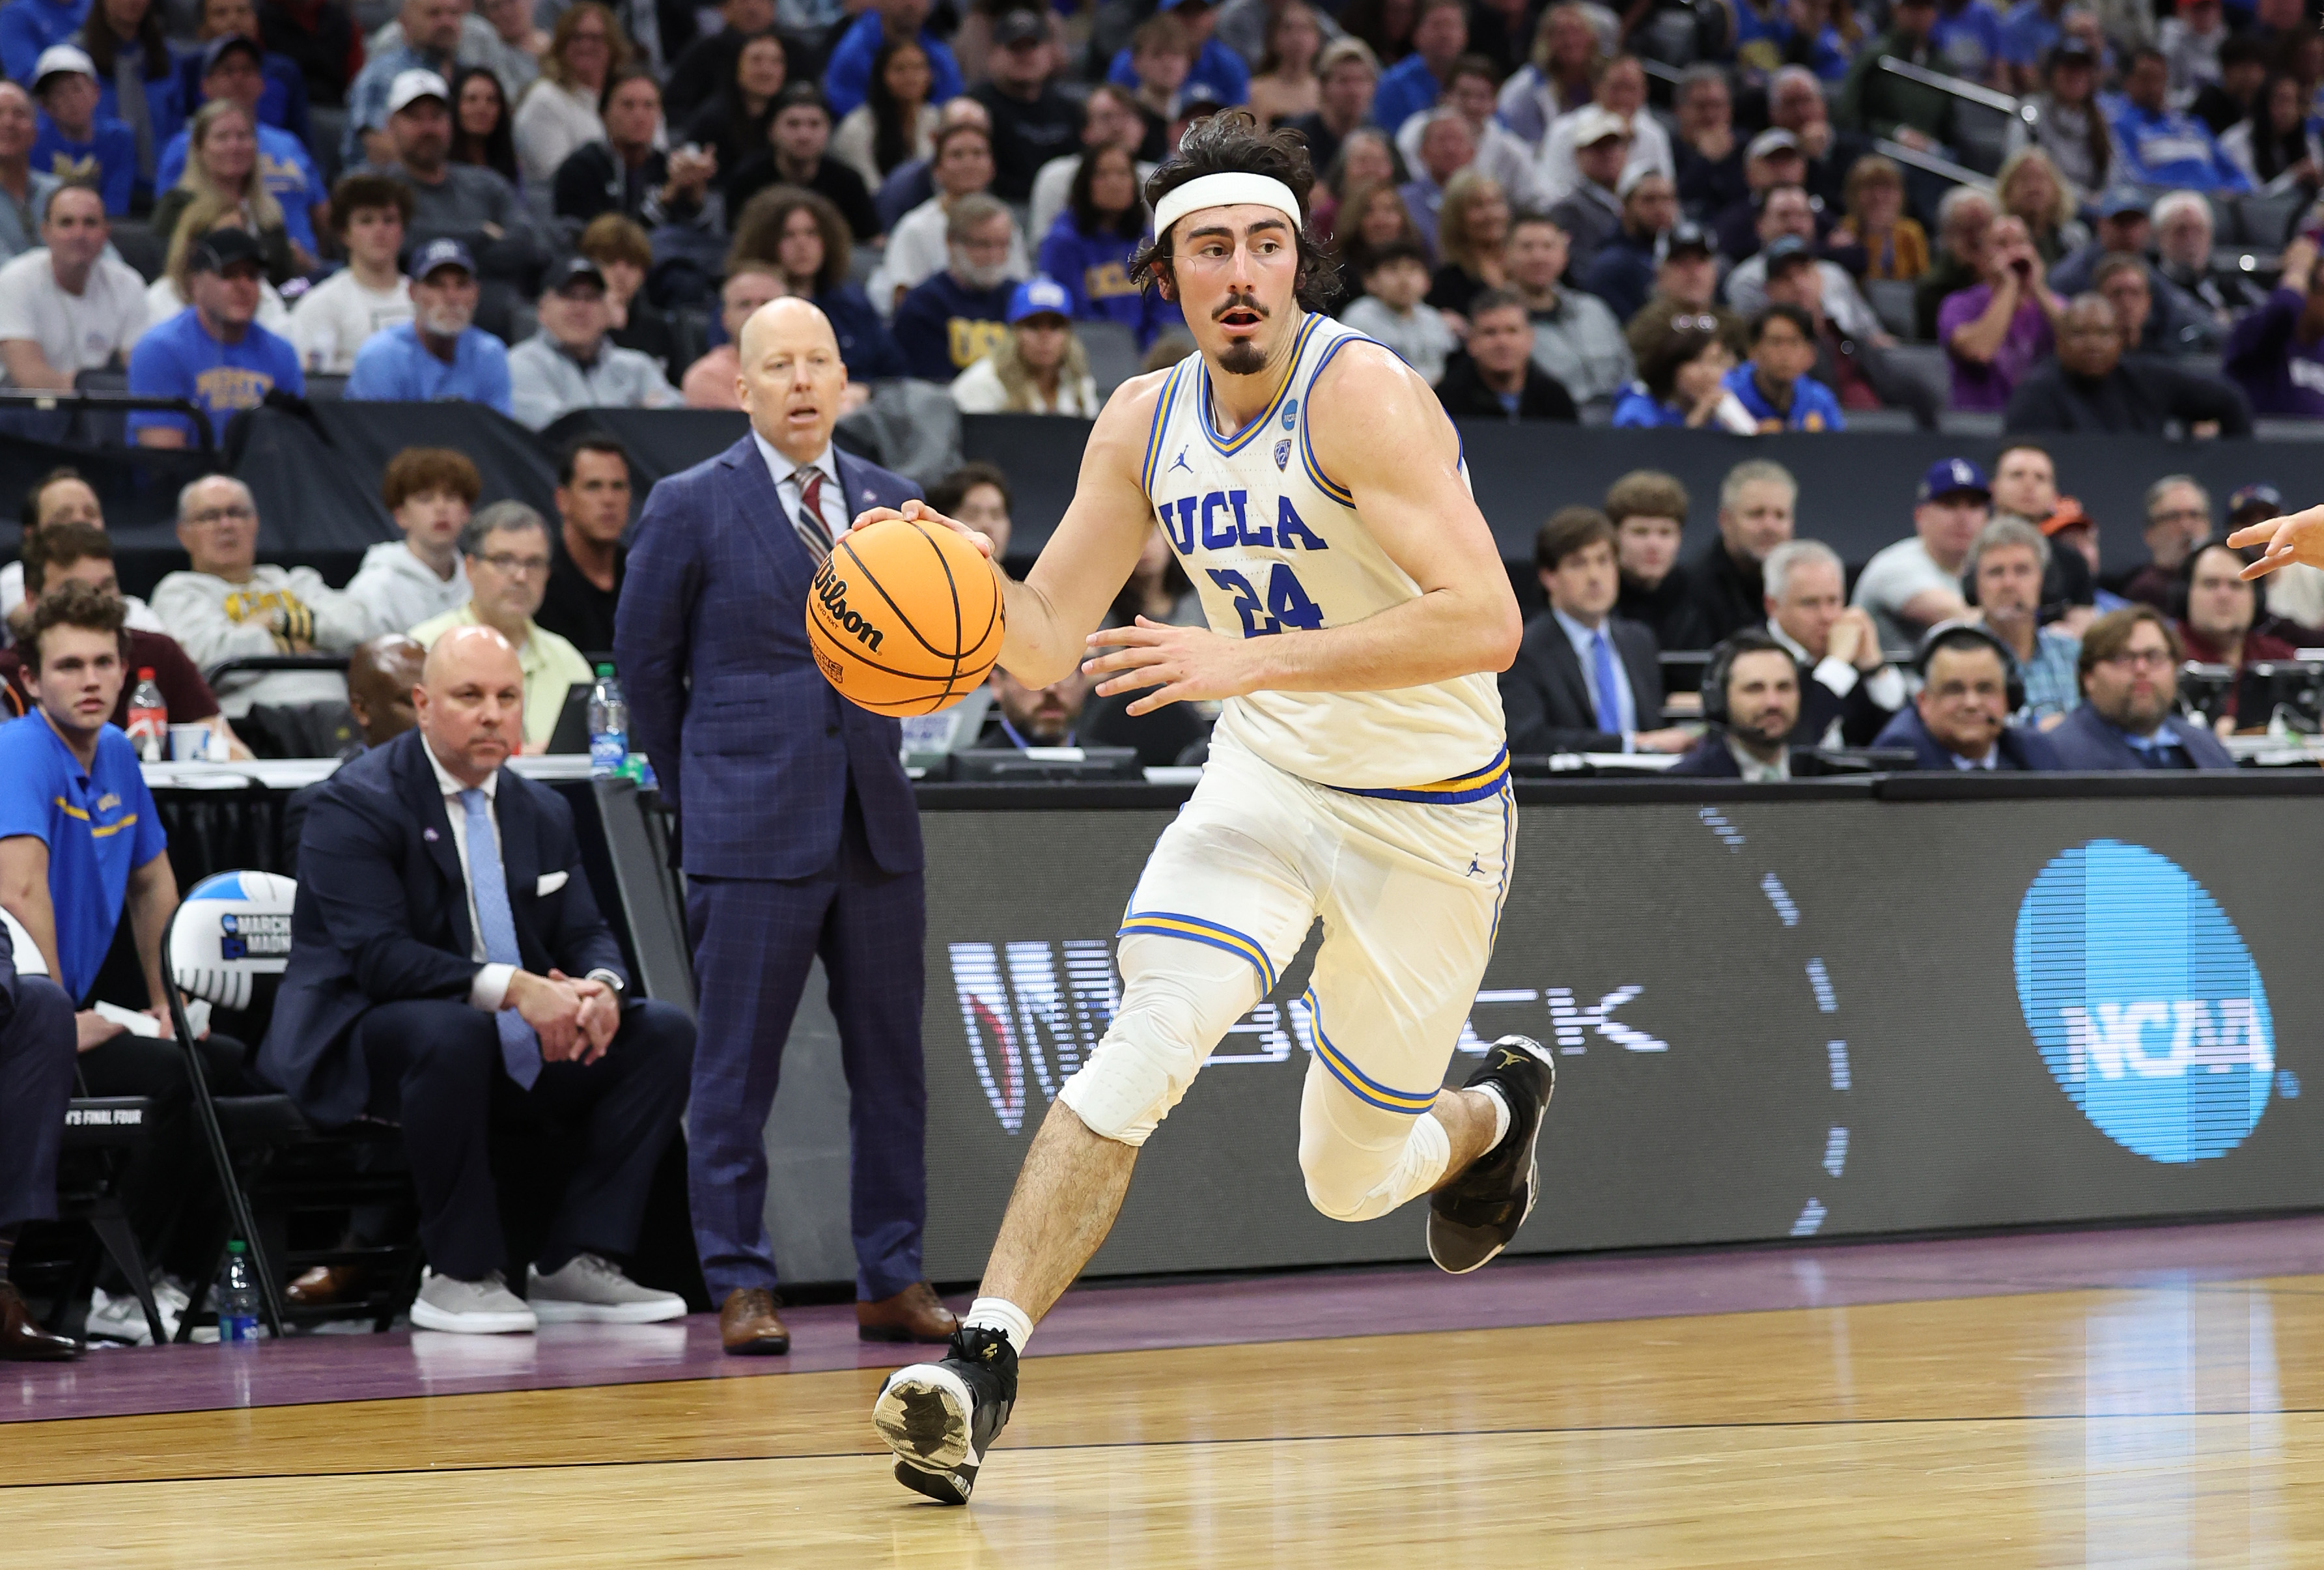 &nbsp;Jaime Jaquez Jr. #24 of the UCLA Bruins drives during the second half against the Northwestern Wildcats in the second round of the NCAA Men’s Basketball Tournament at Golden 1 Center on March 18, 2023 in Sacramento, California.